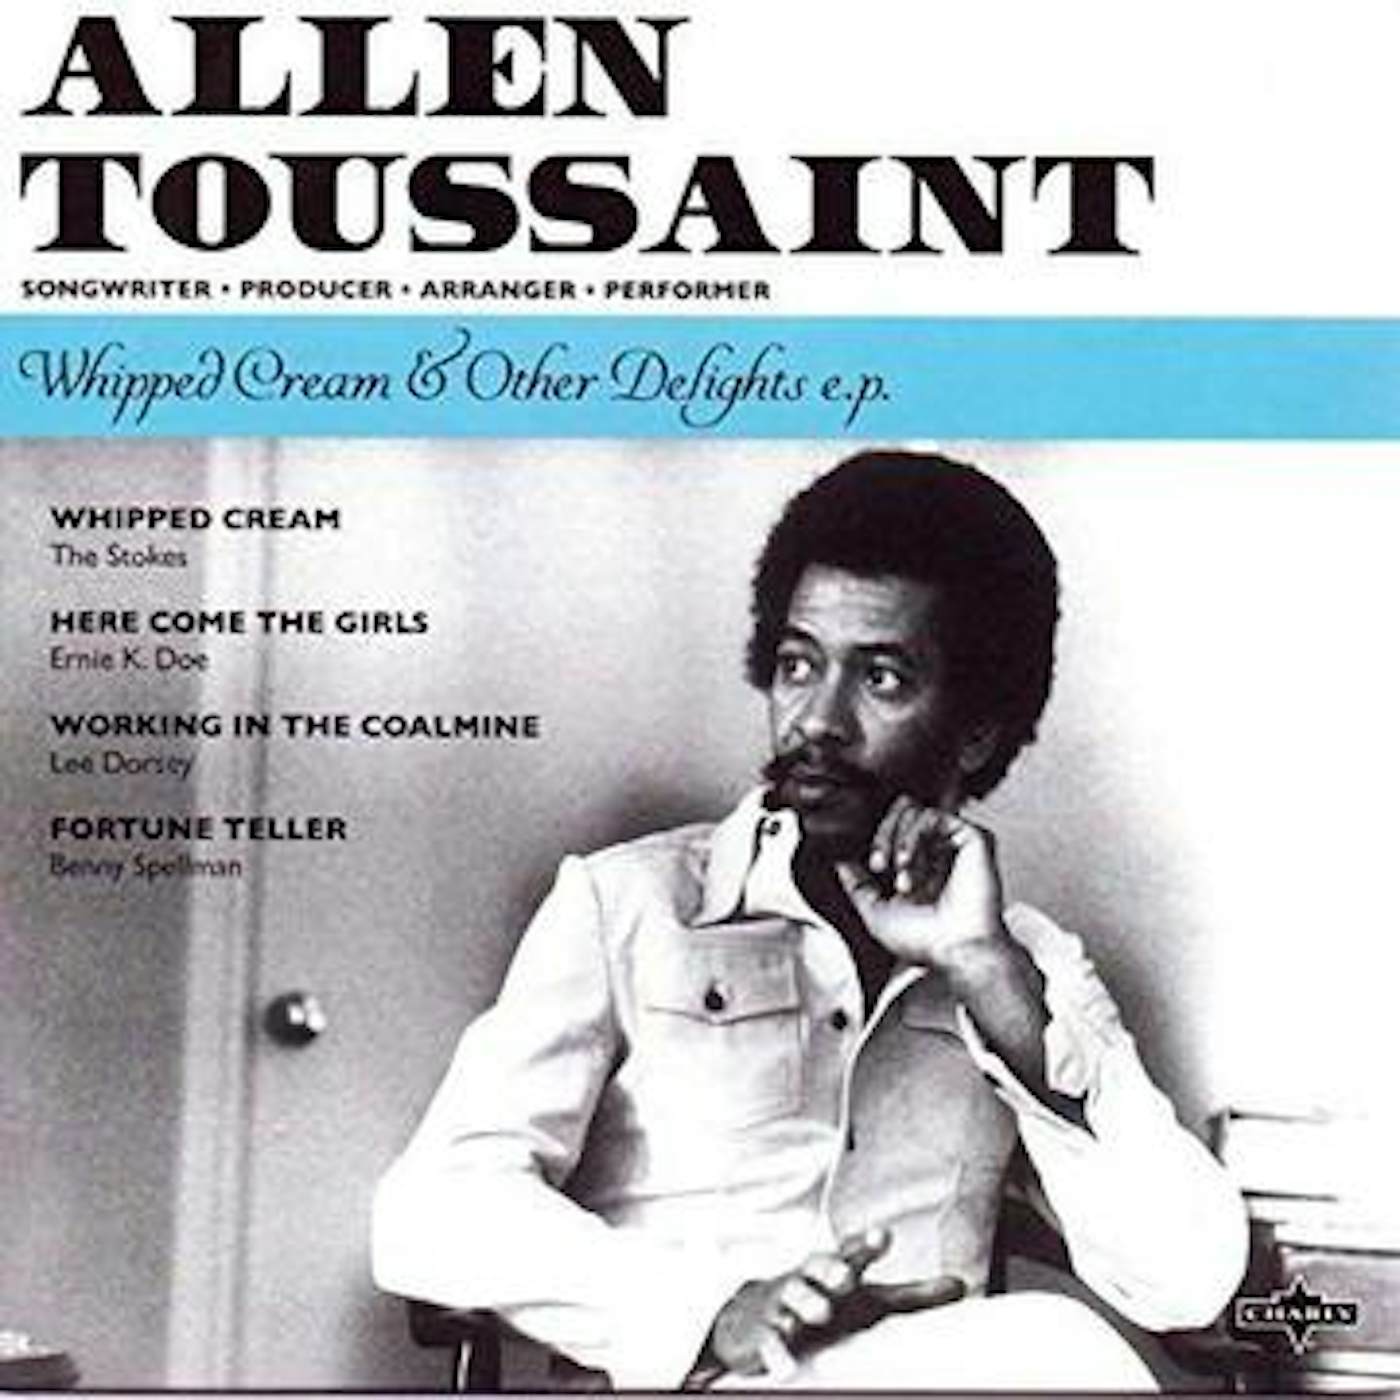 Allen Toussaint Whipped Cream & Other Delights (7 ) vinyl record